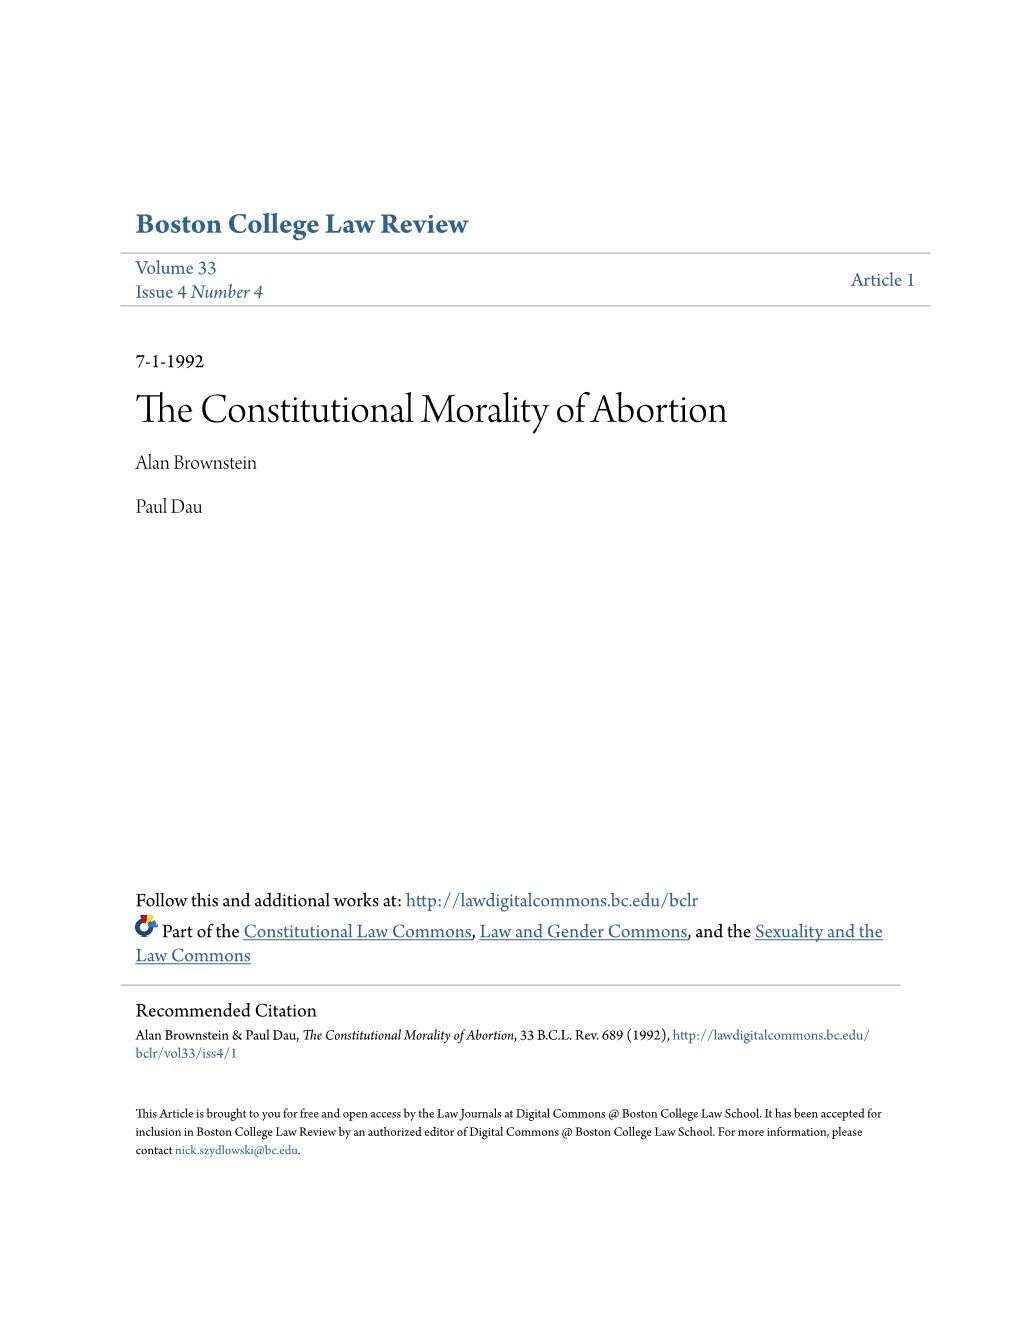 The Constitutional Morality of Abortion, 33 B.C.L